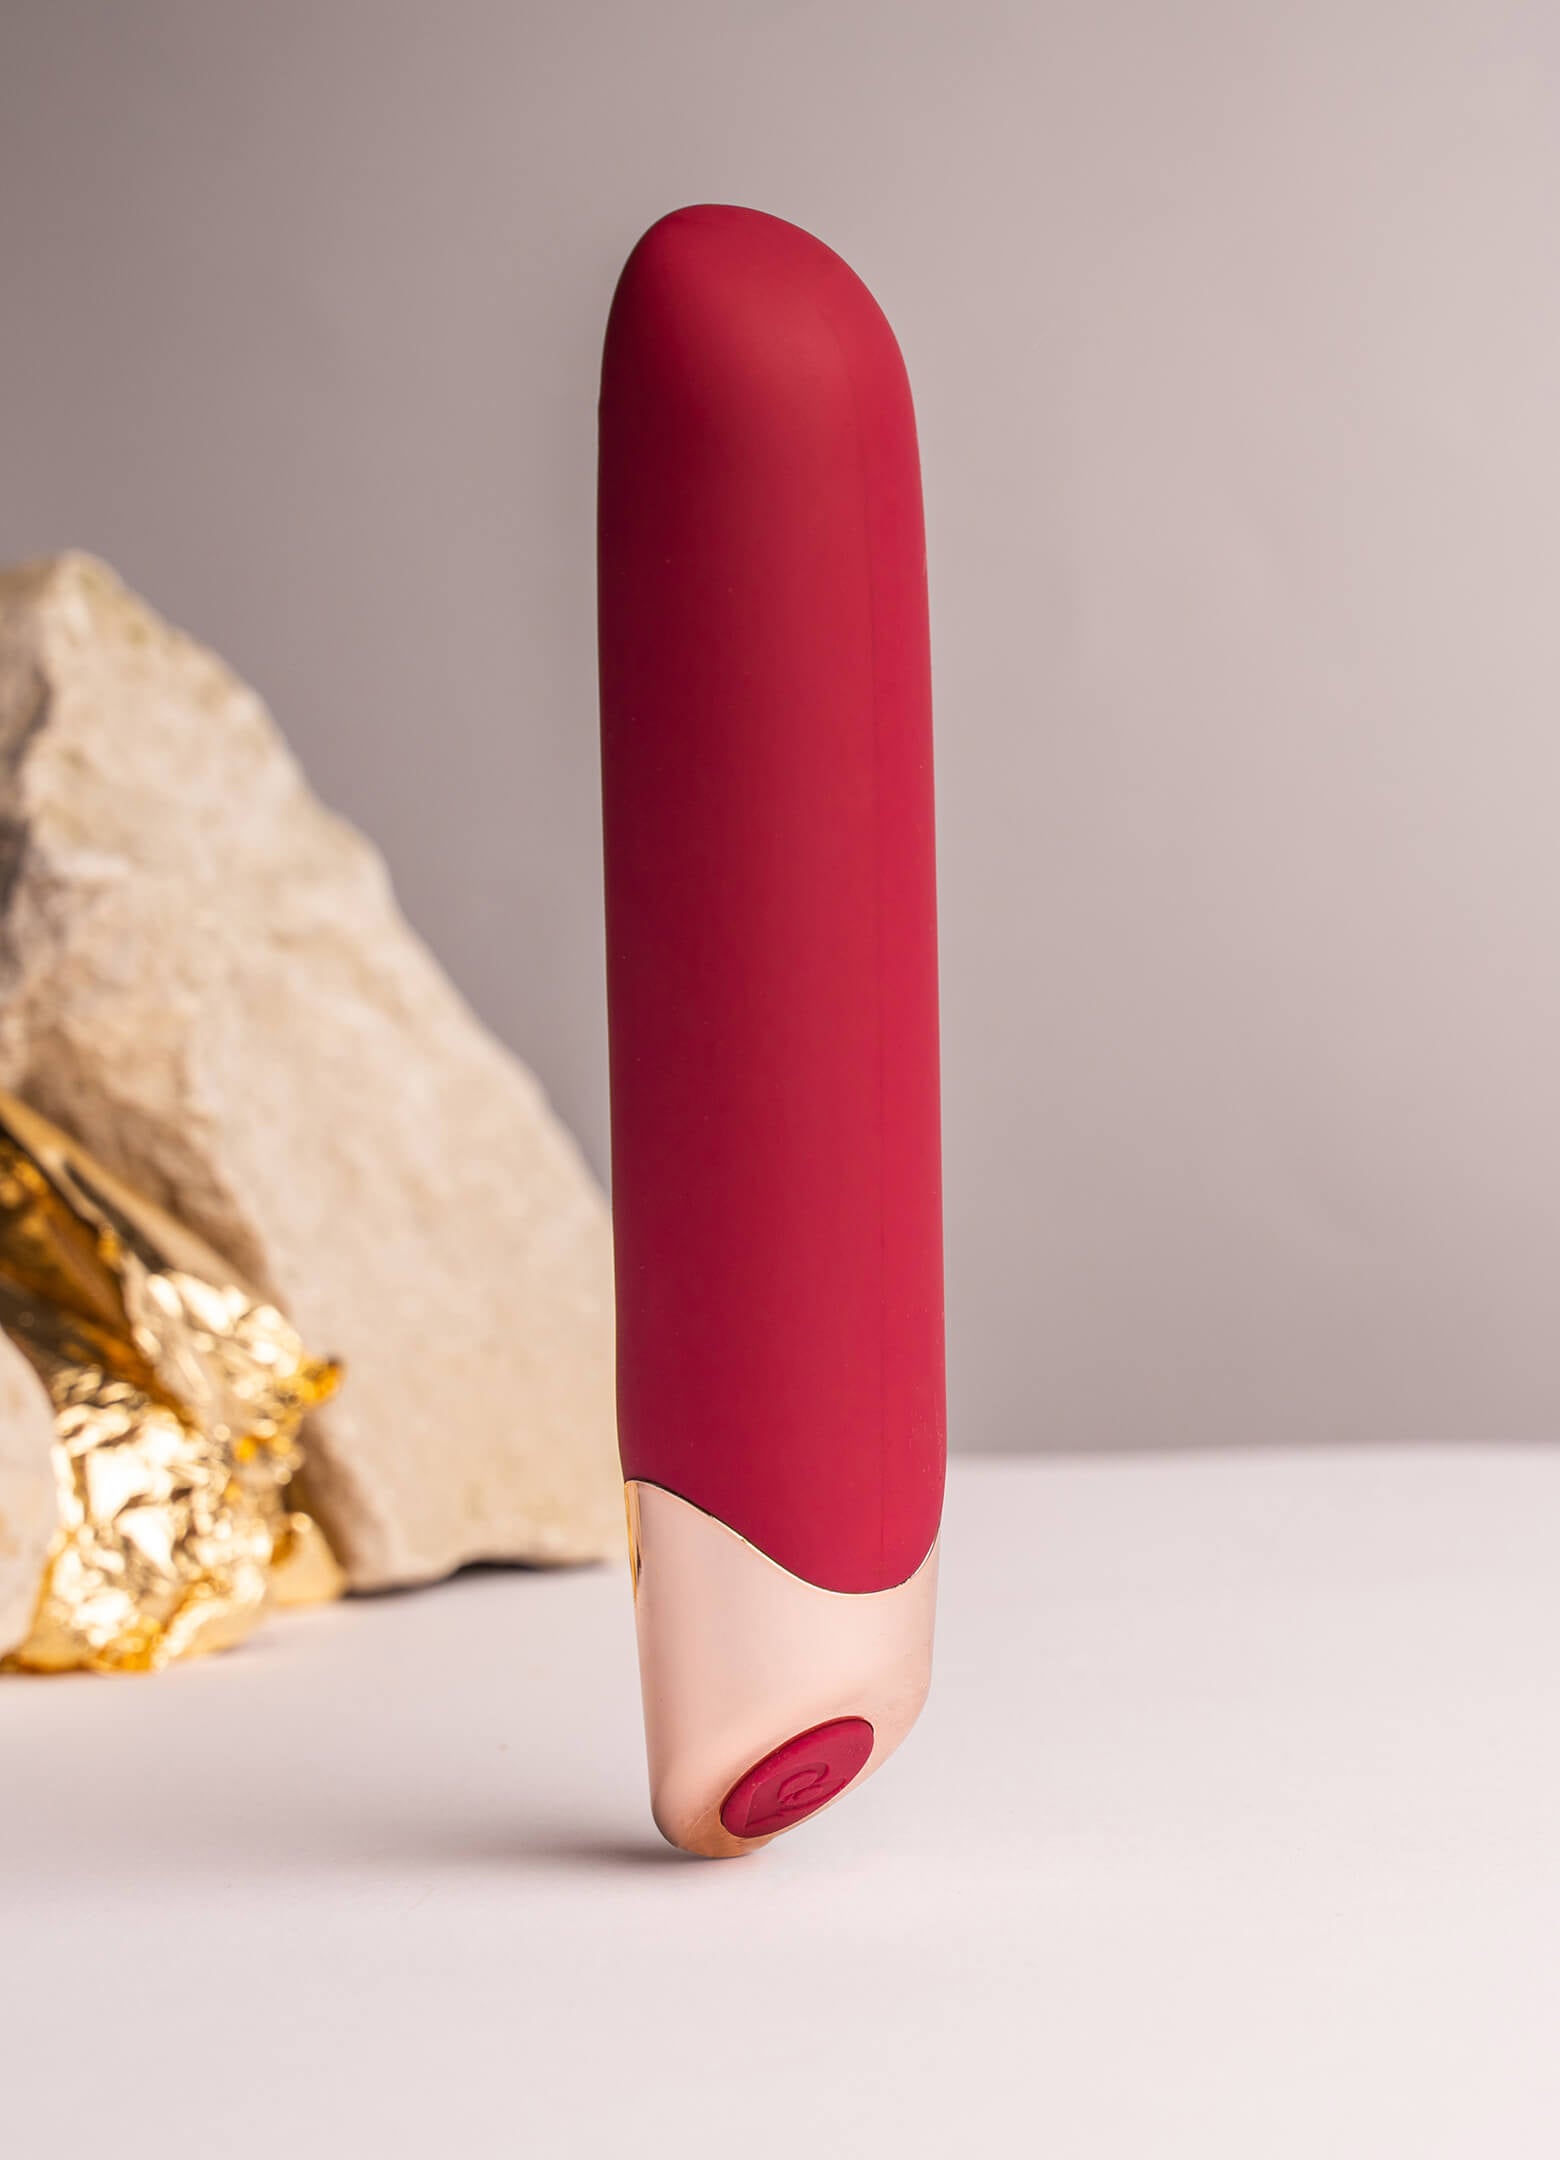 Burgundy and rose gold elegant vibrator with a chiseled tip.